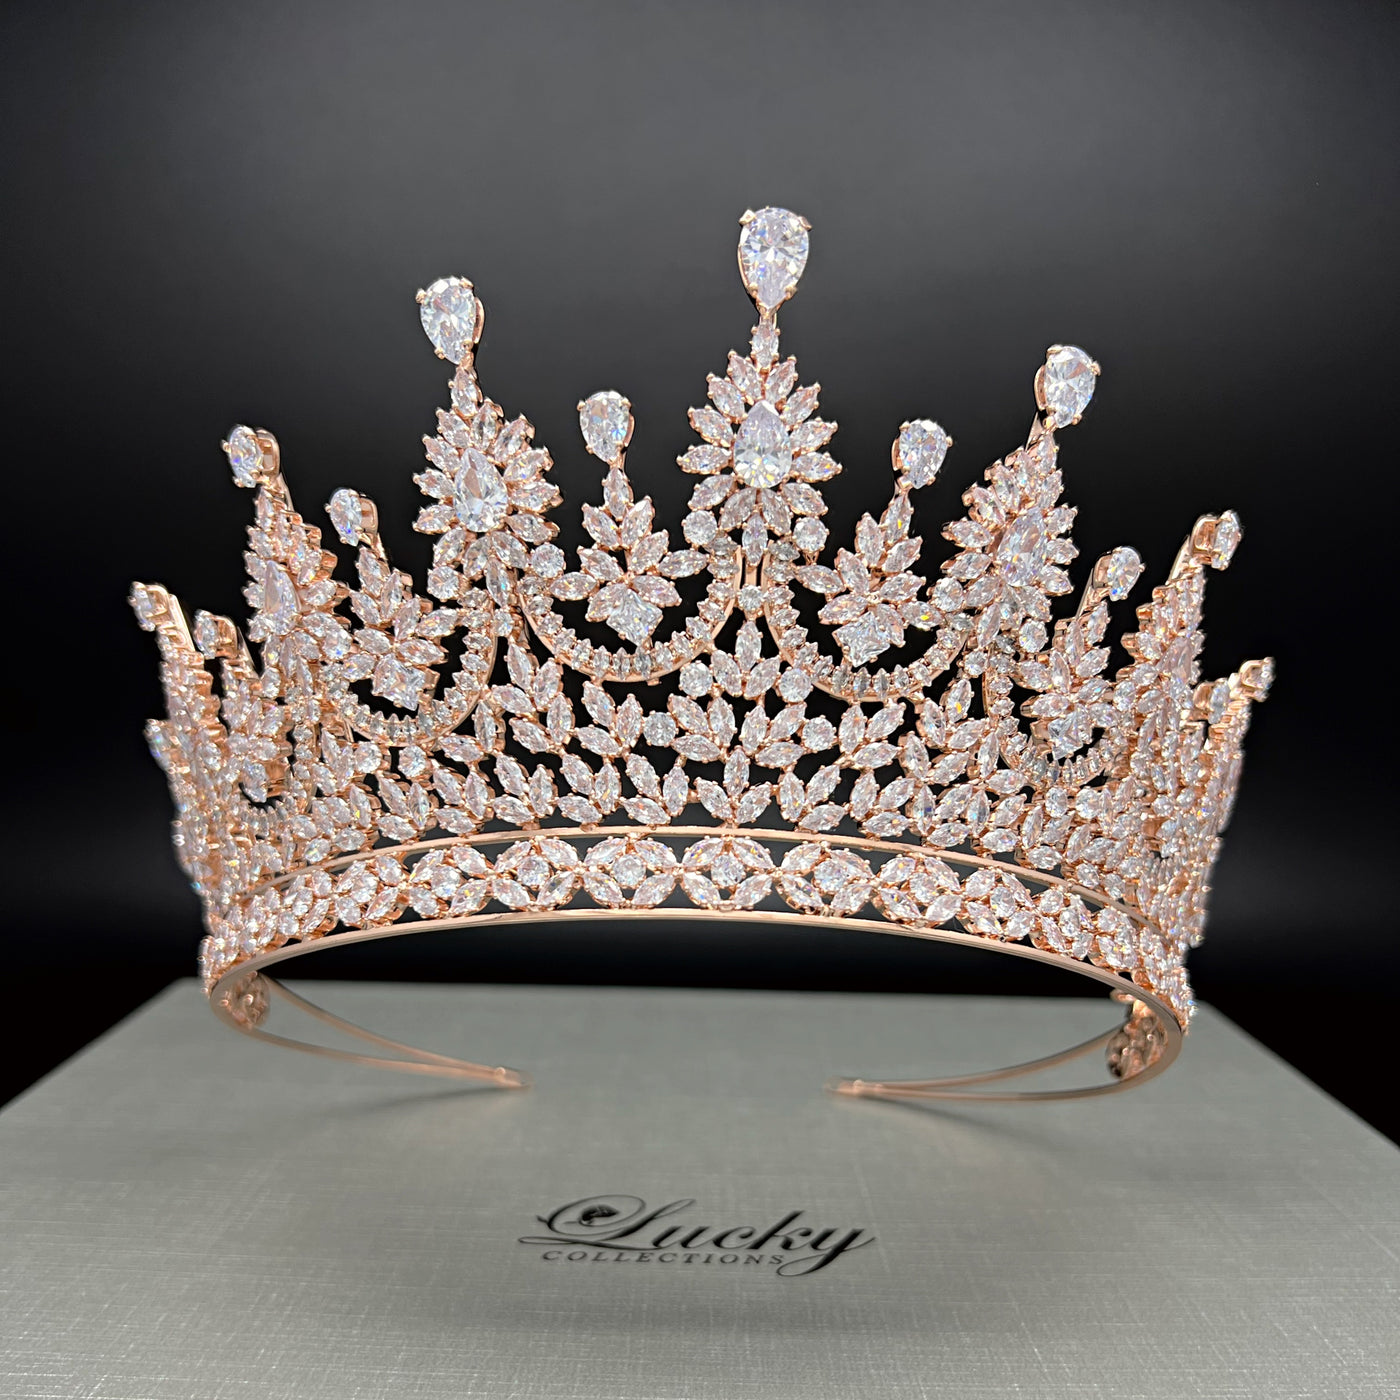 Rosegold Opulent Cubic Zirconia Tiara with Glistening gems of Crystal Shine